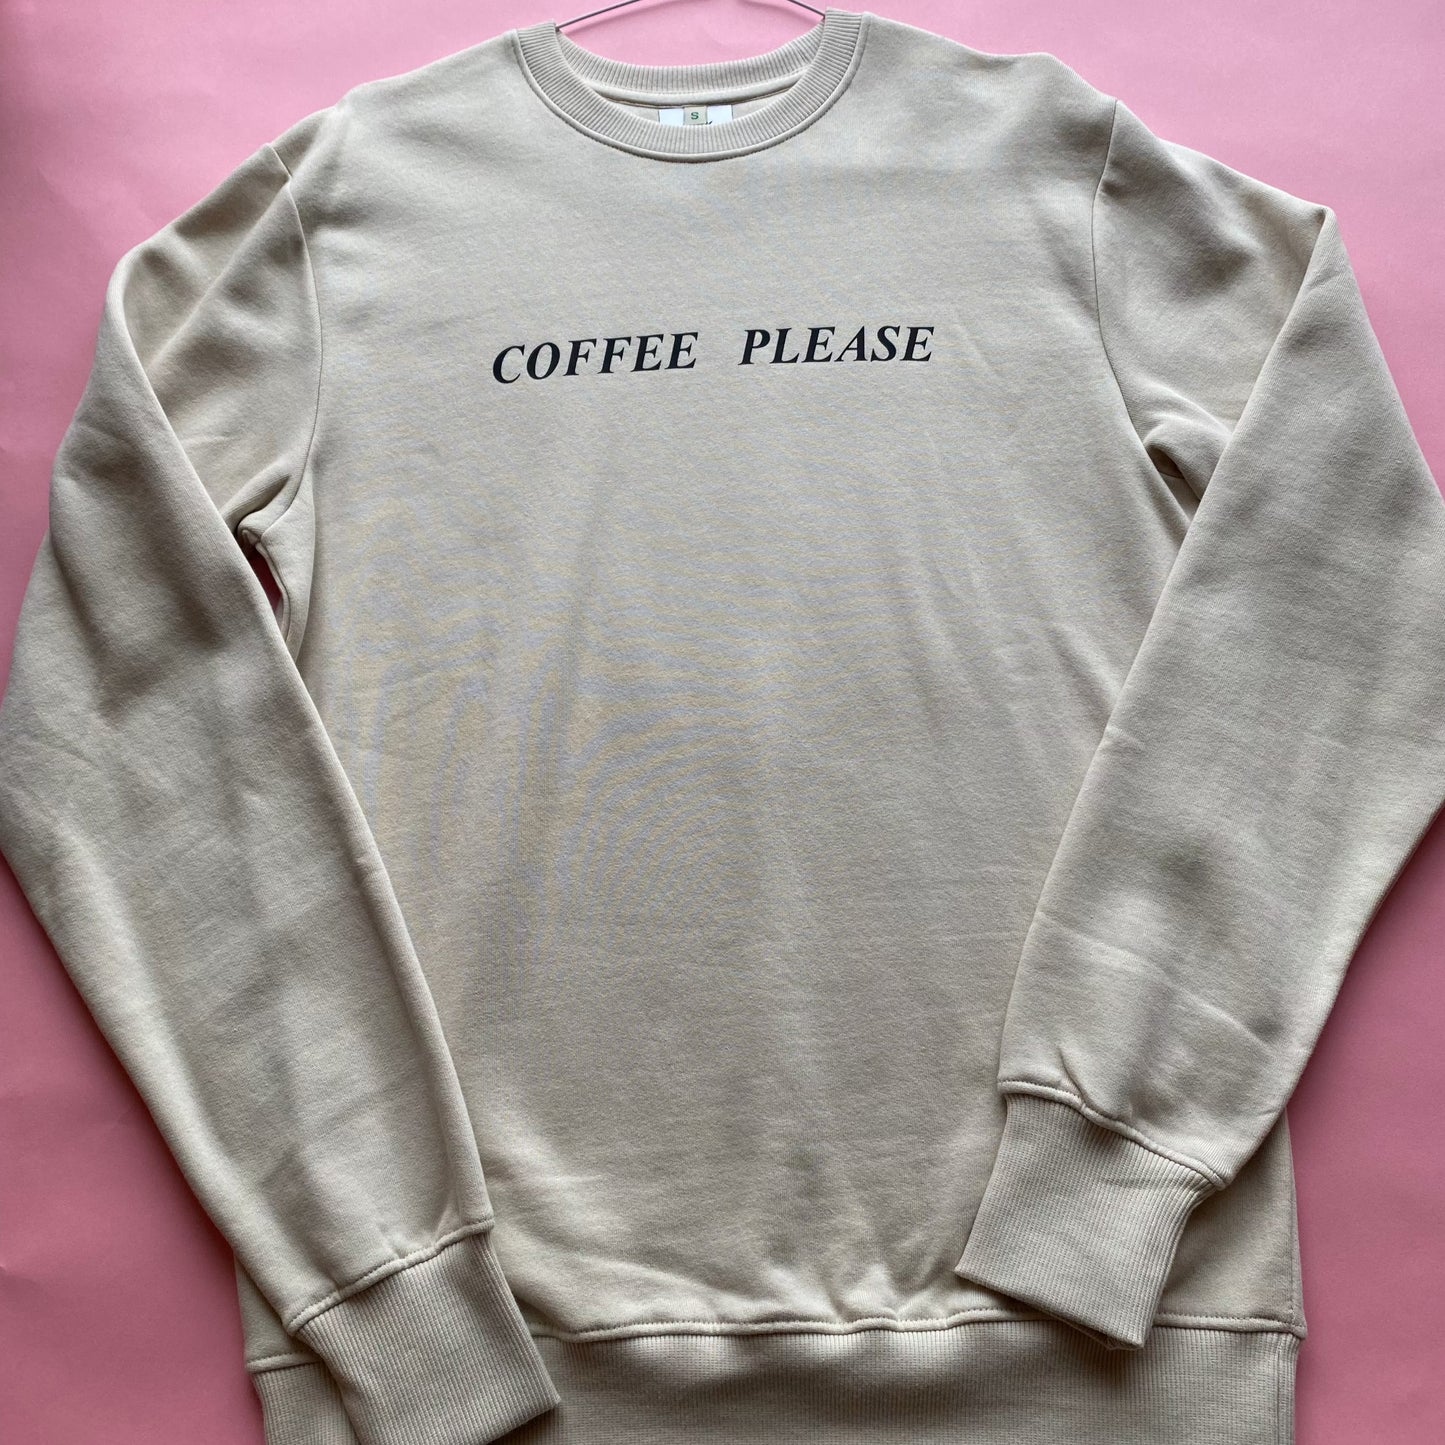 S - Coffee Please And a Biscuit Cream Organic Sweatshirt SALE